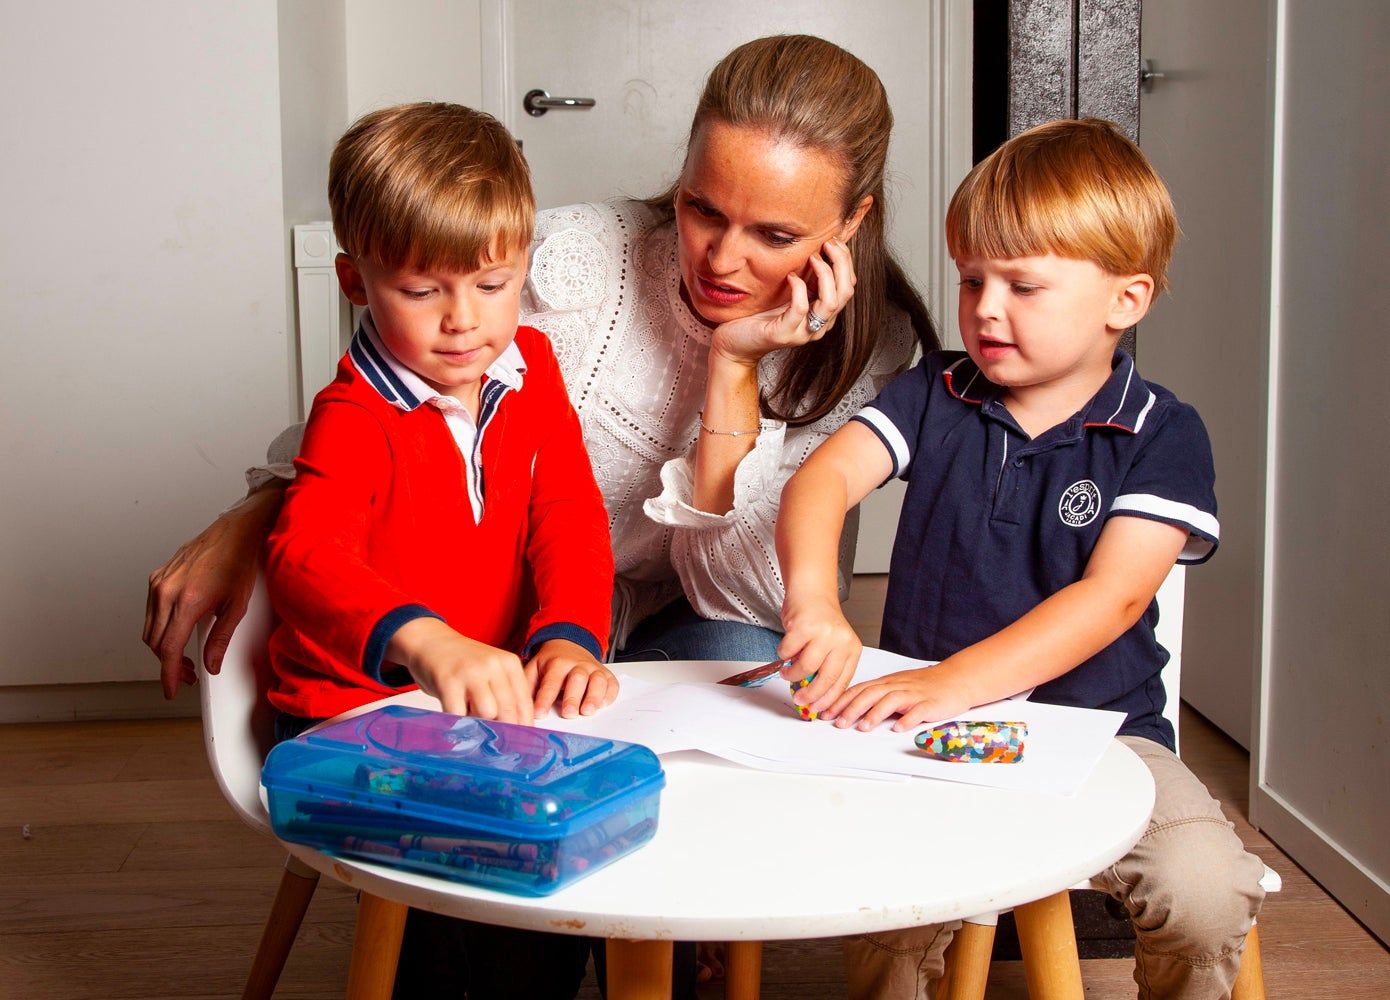 Sally King McBride and her two sons coloring at a small table